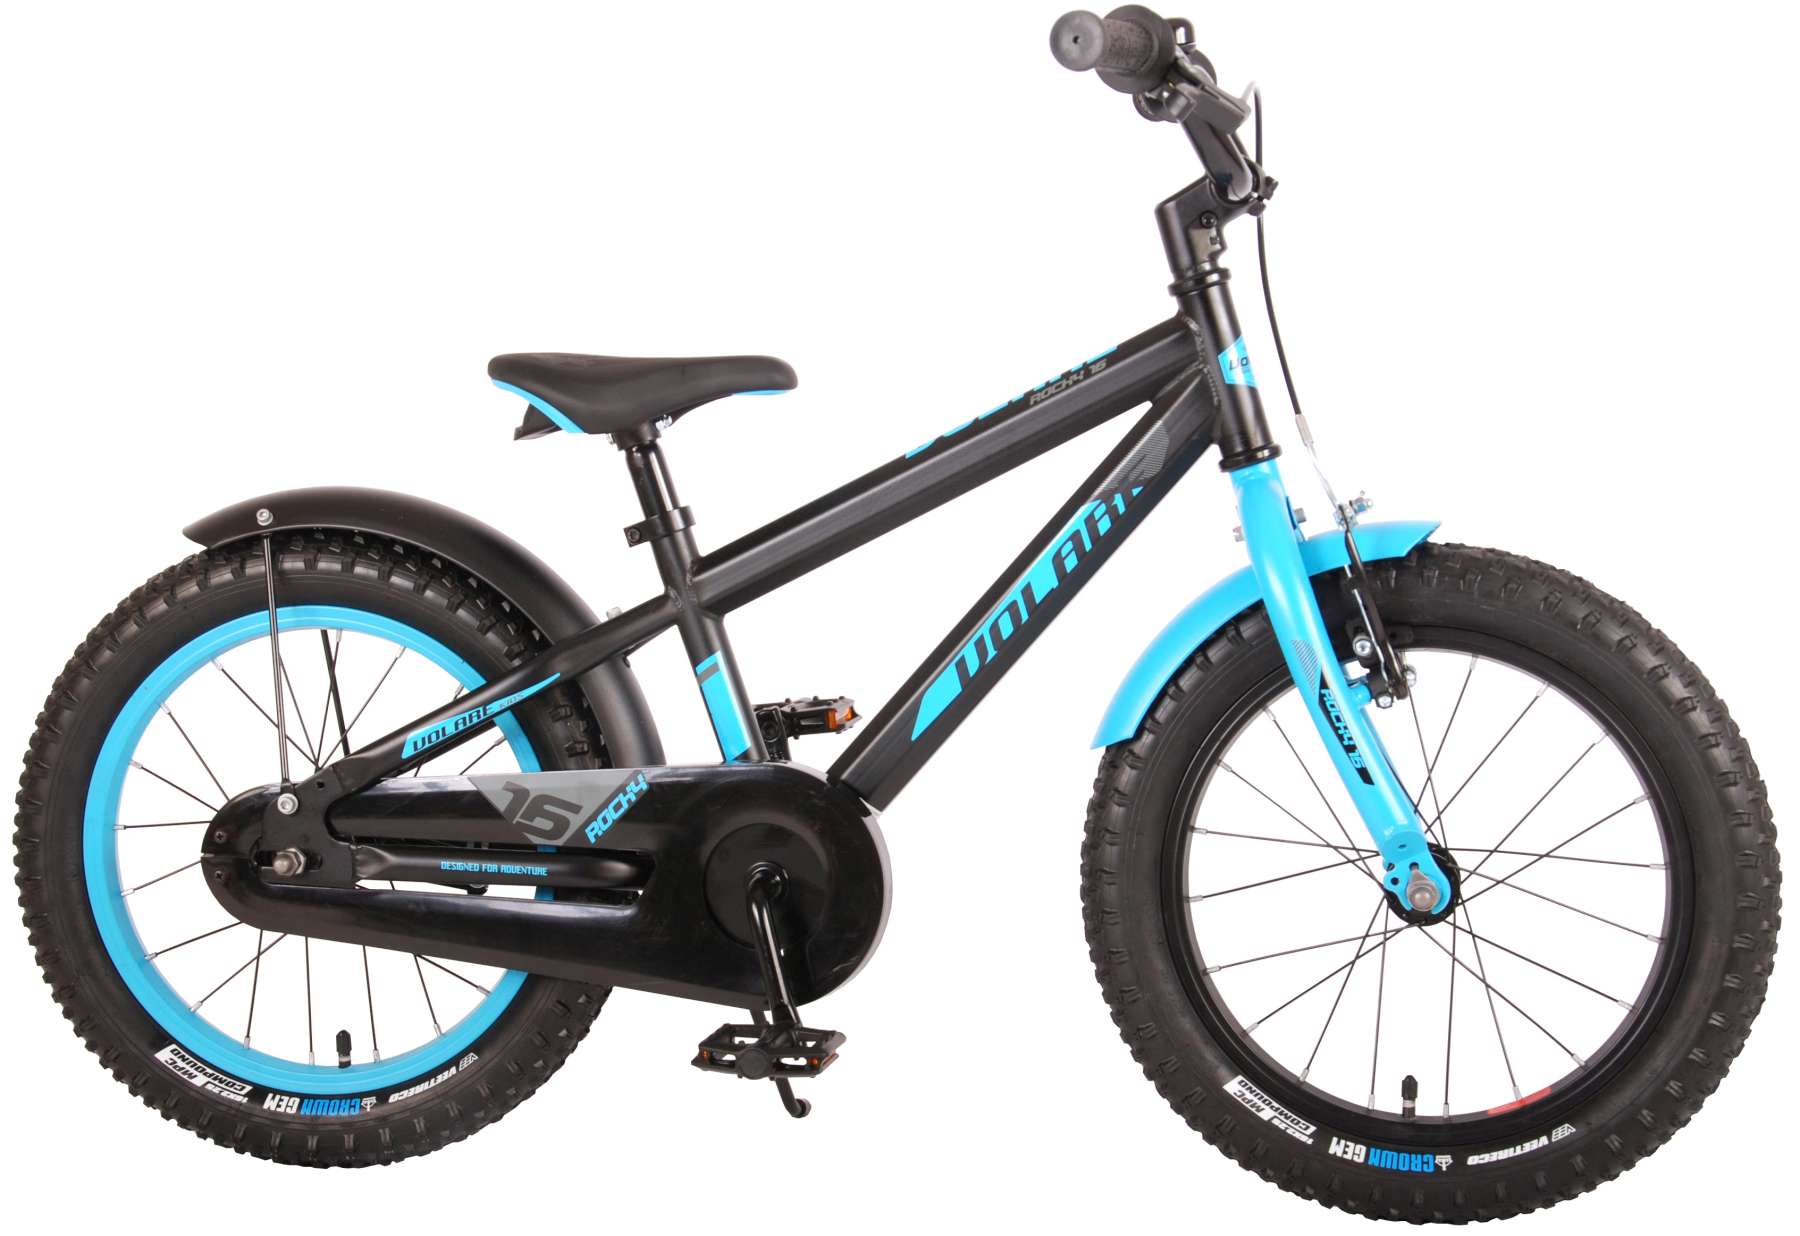 Doe voorzichtig Banyan duisternis Volare Rocky Children's Bicycle - 16 inch - Black Blue - 95% assembled -  Prime Collection